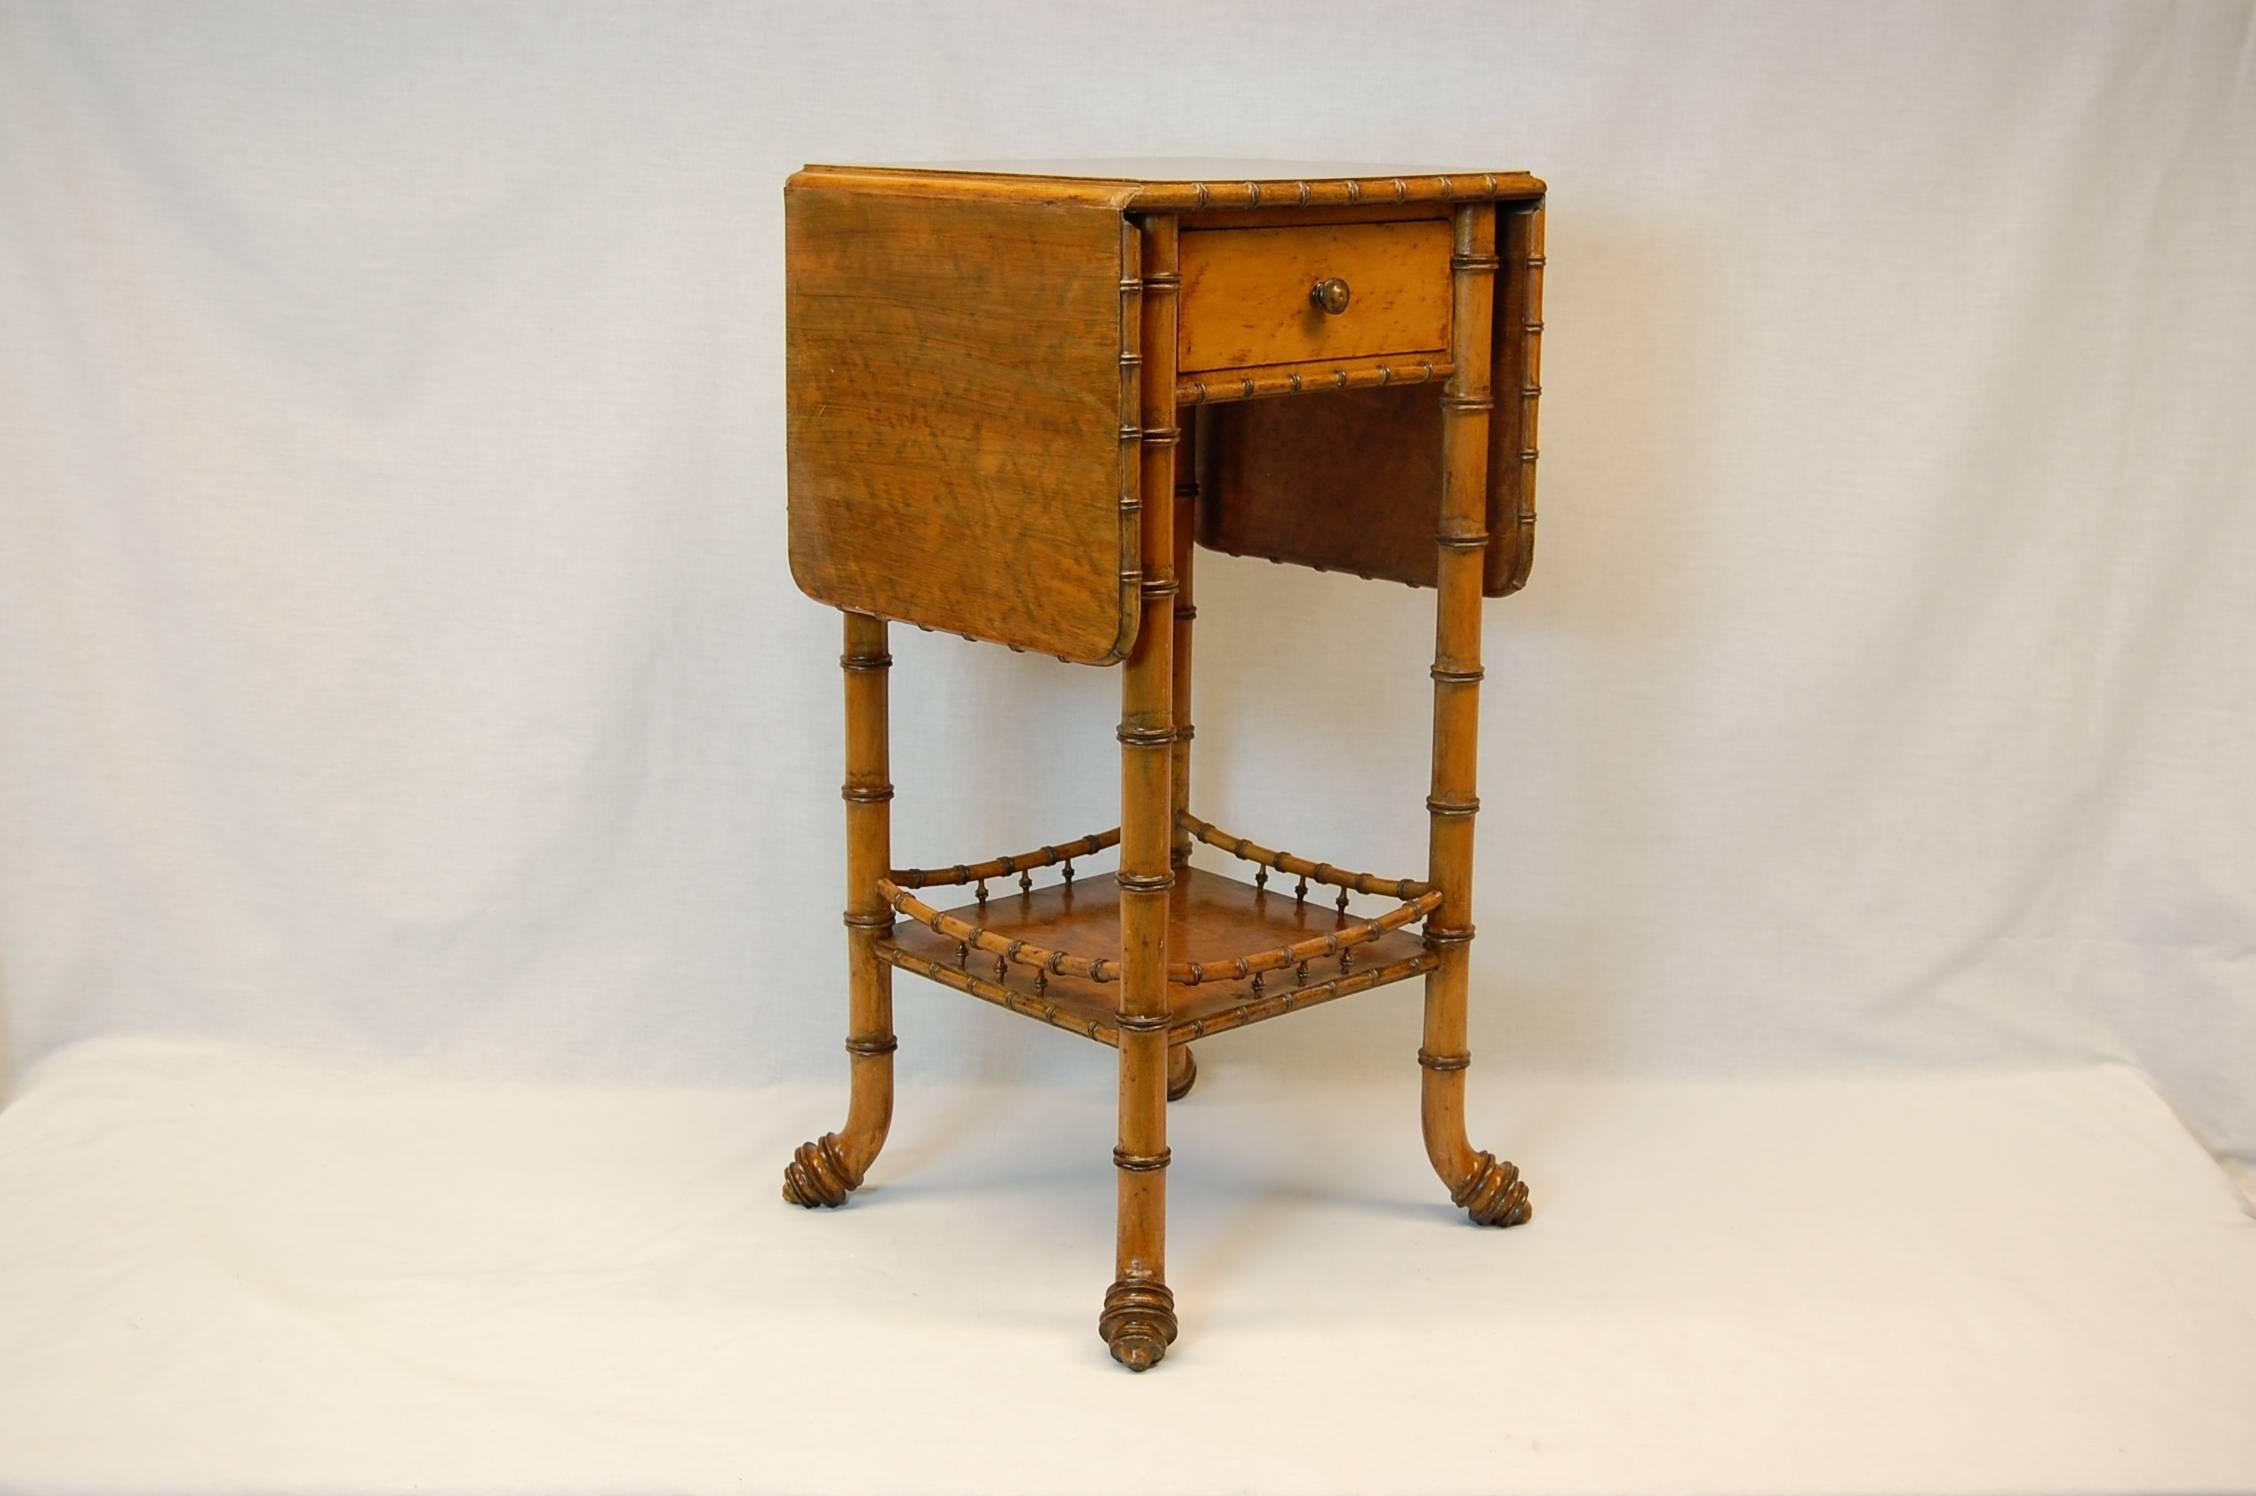 Late 19th Century French Faux Wood and Bird's-Eye Maple Bamboo Drop-Leaf Table with Drawer